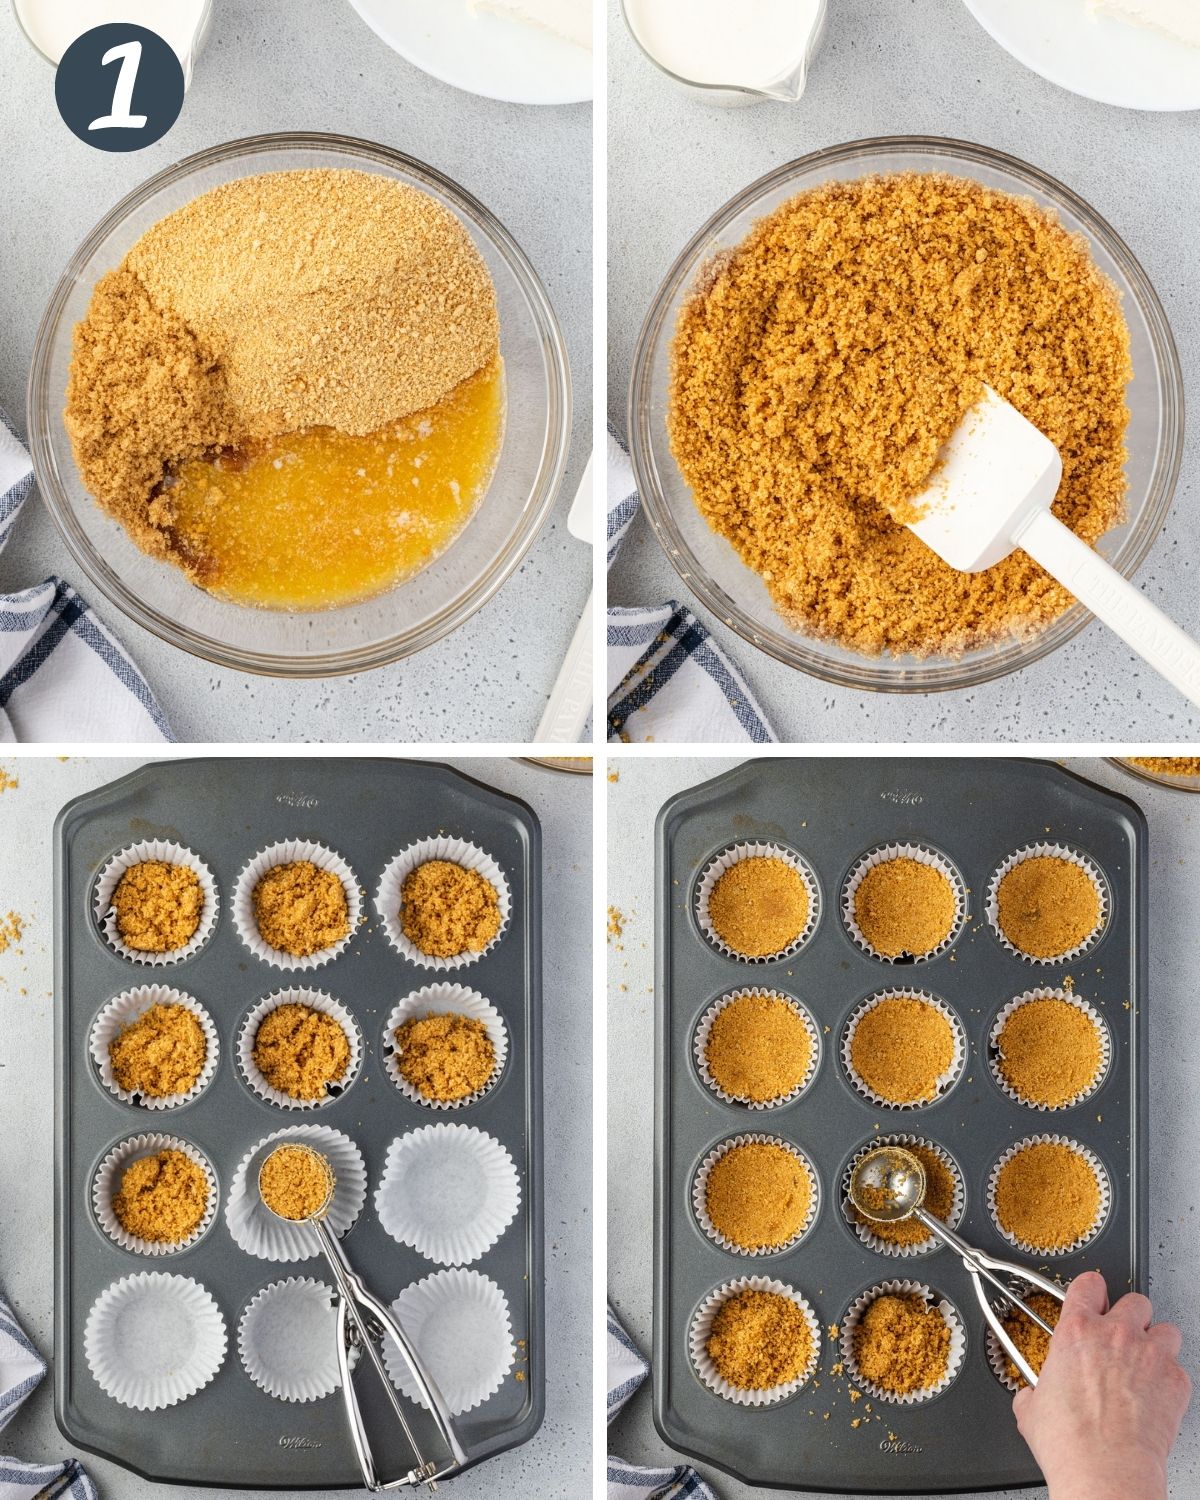 4 images showing how to make graham crust and fill each muffin tin cup.